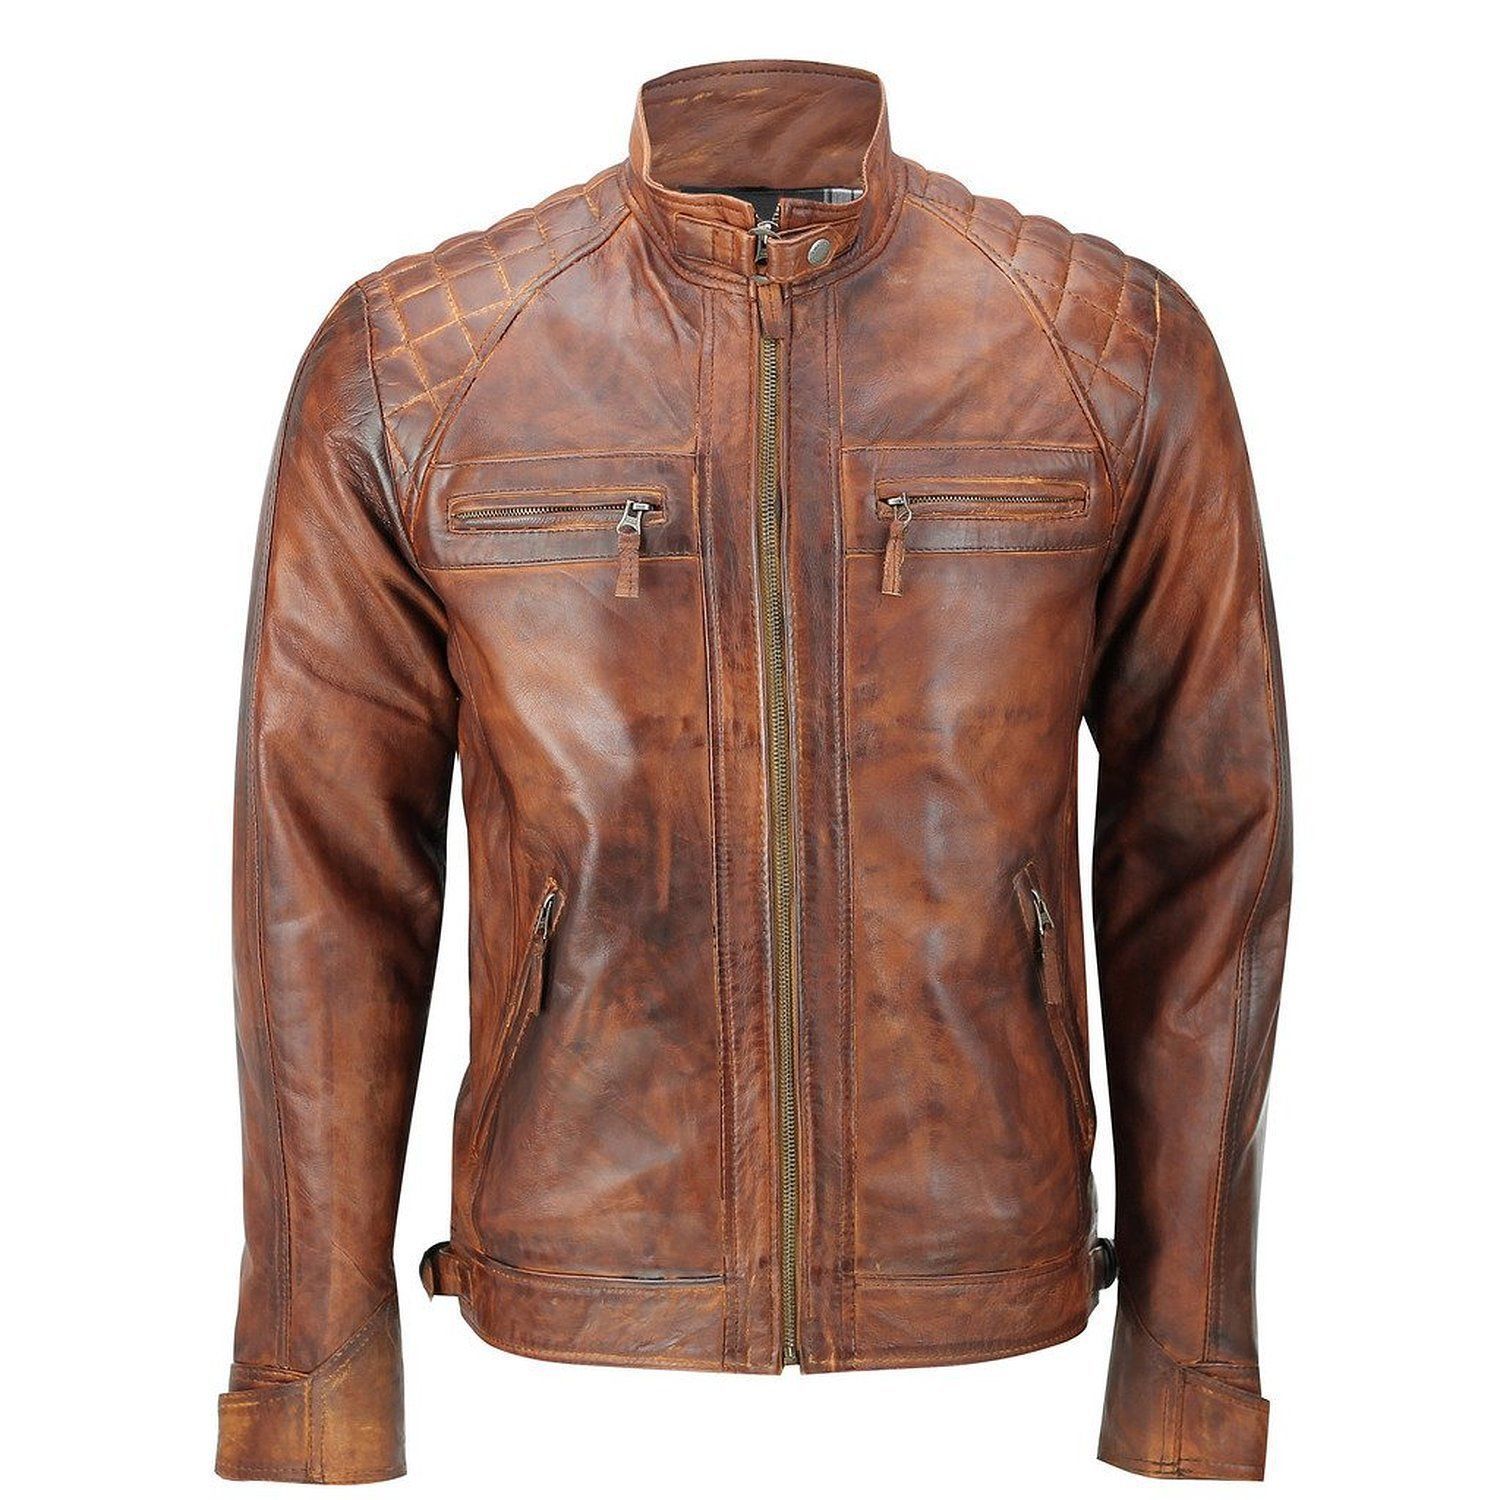 Men's Distressed Tan Slim Casual Waxed Leather Jacket